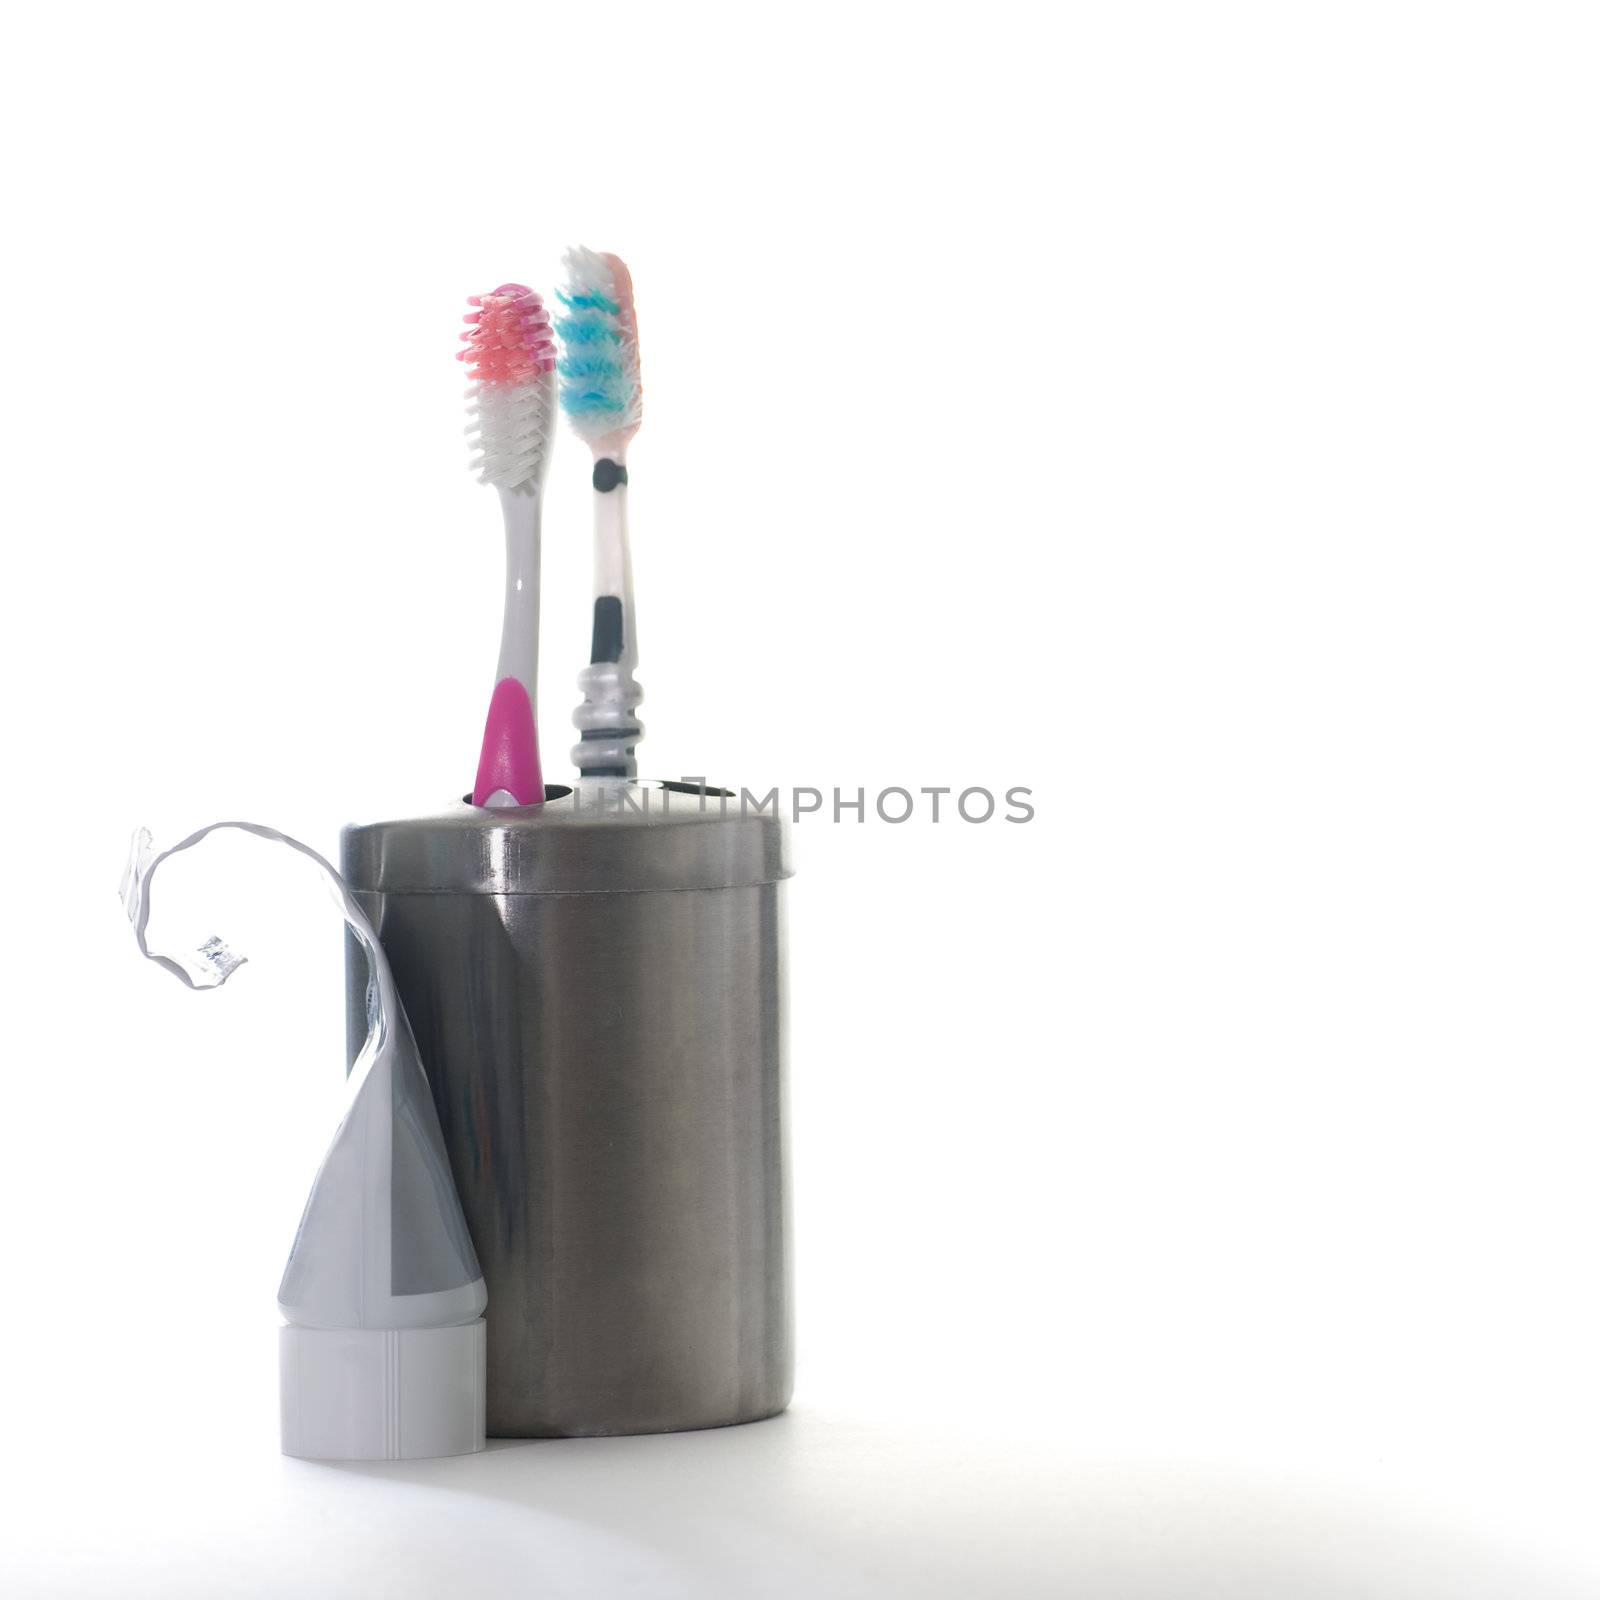 Two toothbrushes in a silver holder, with a half used tube of toothpaste, the end rolled up, isolated on white